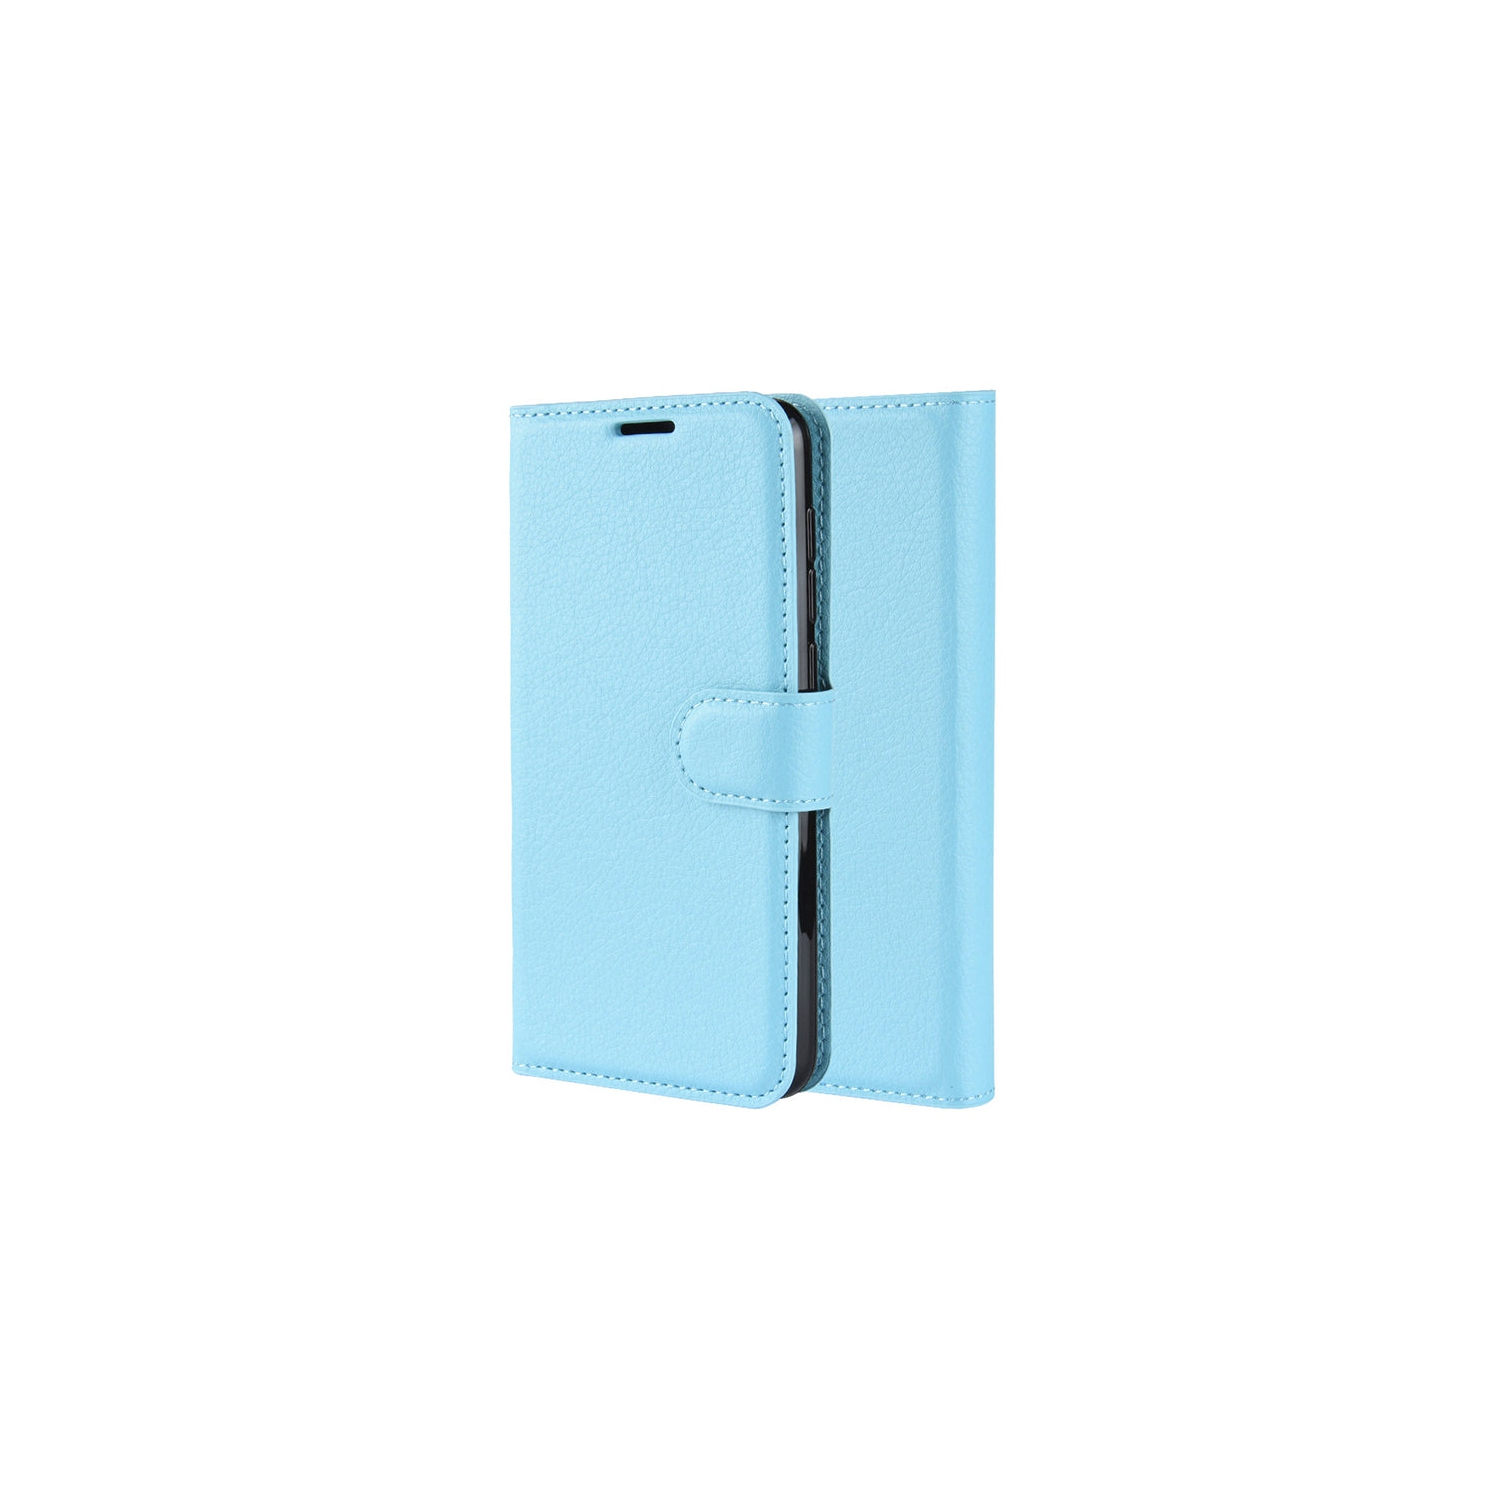 PANDACO Light Blue Leather Wallet Case for iPhone 13 Pro Max